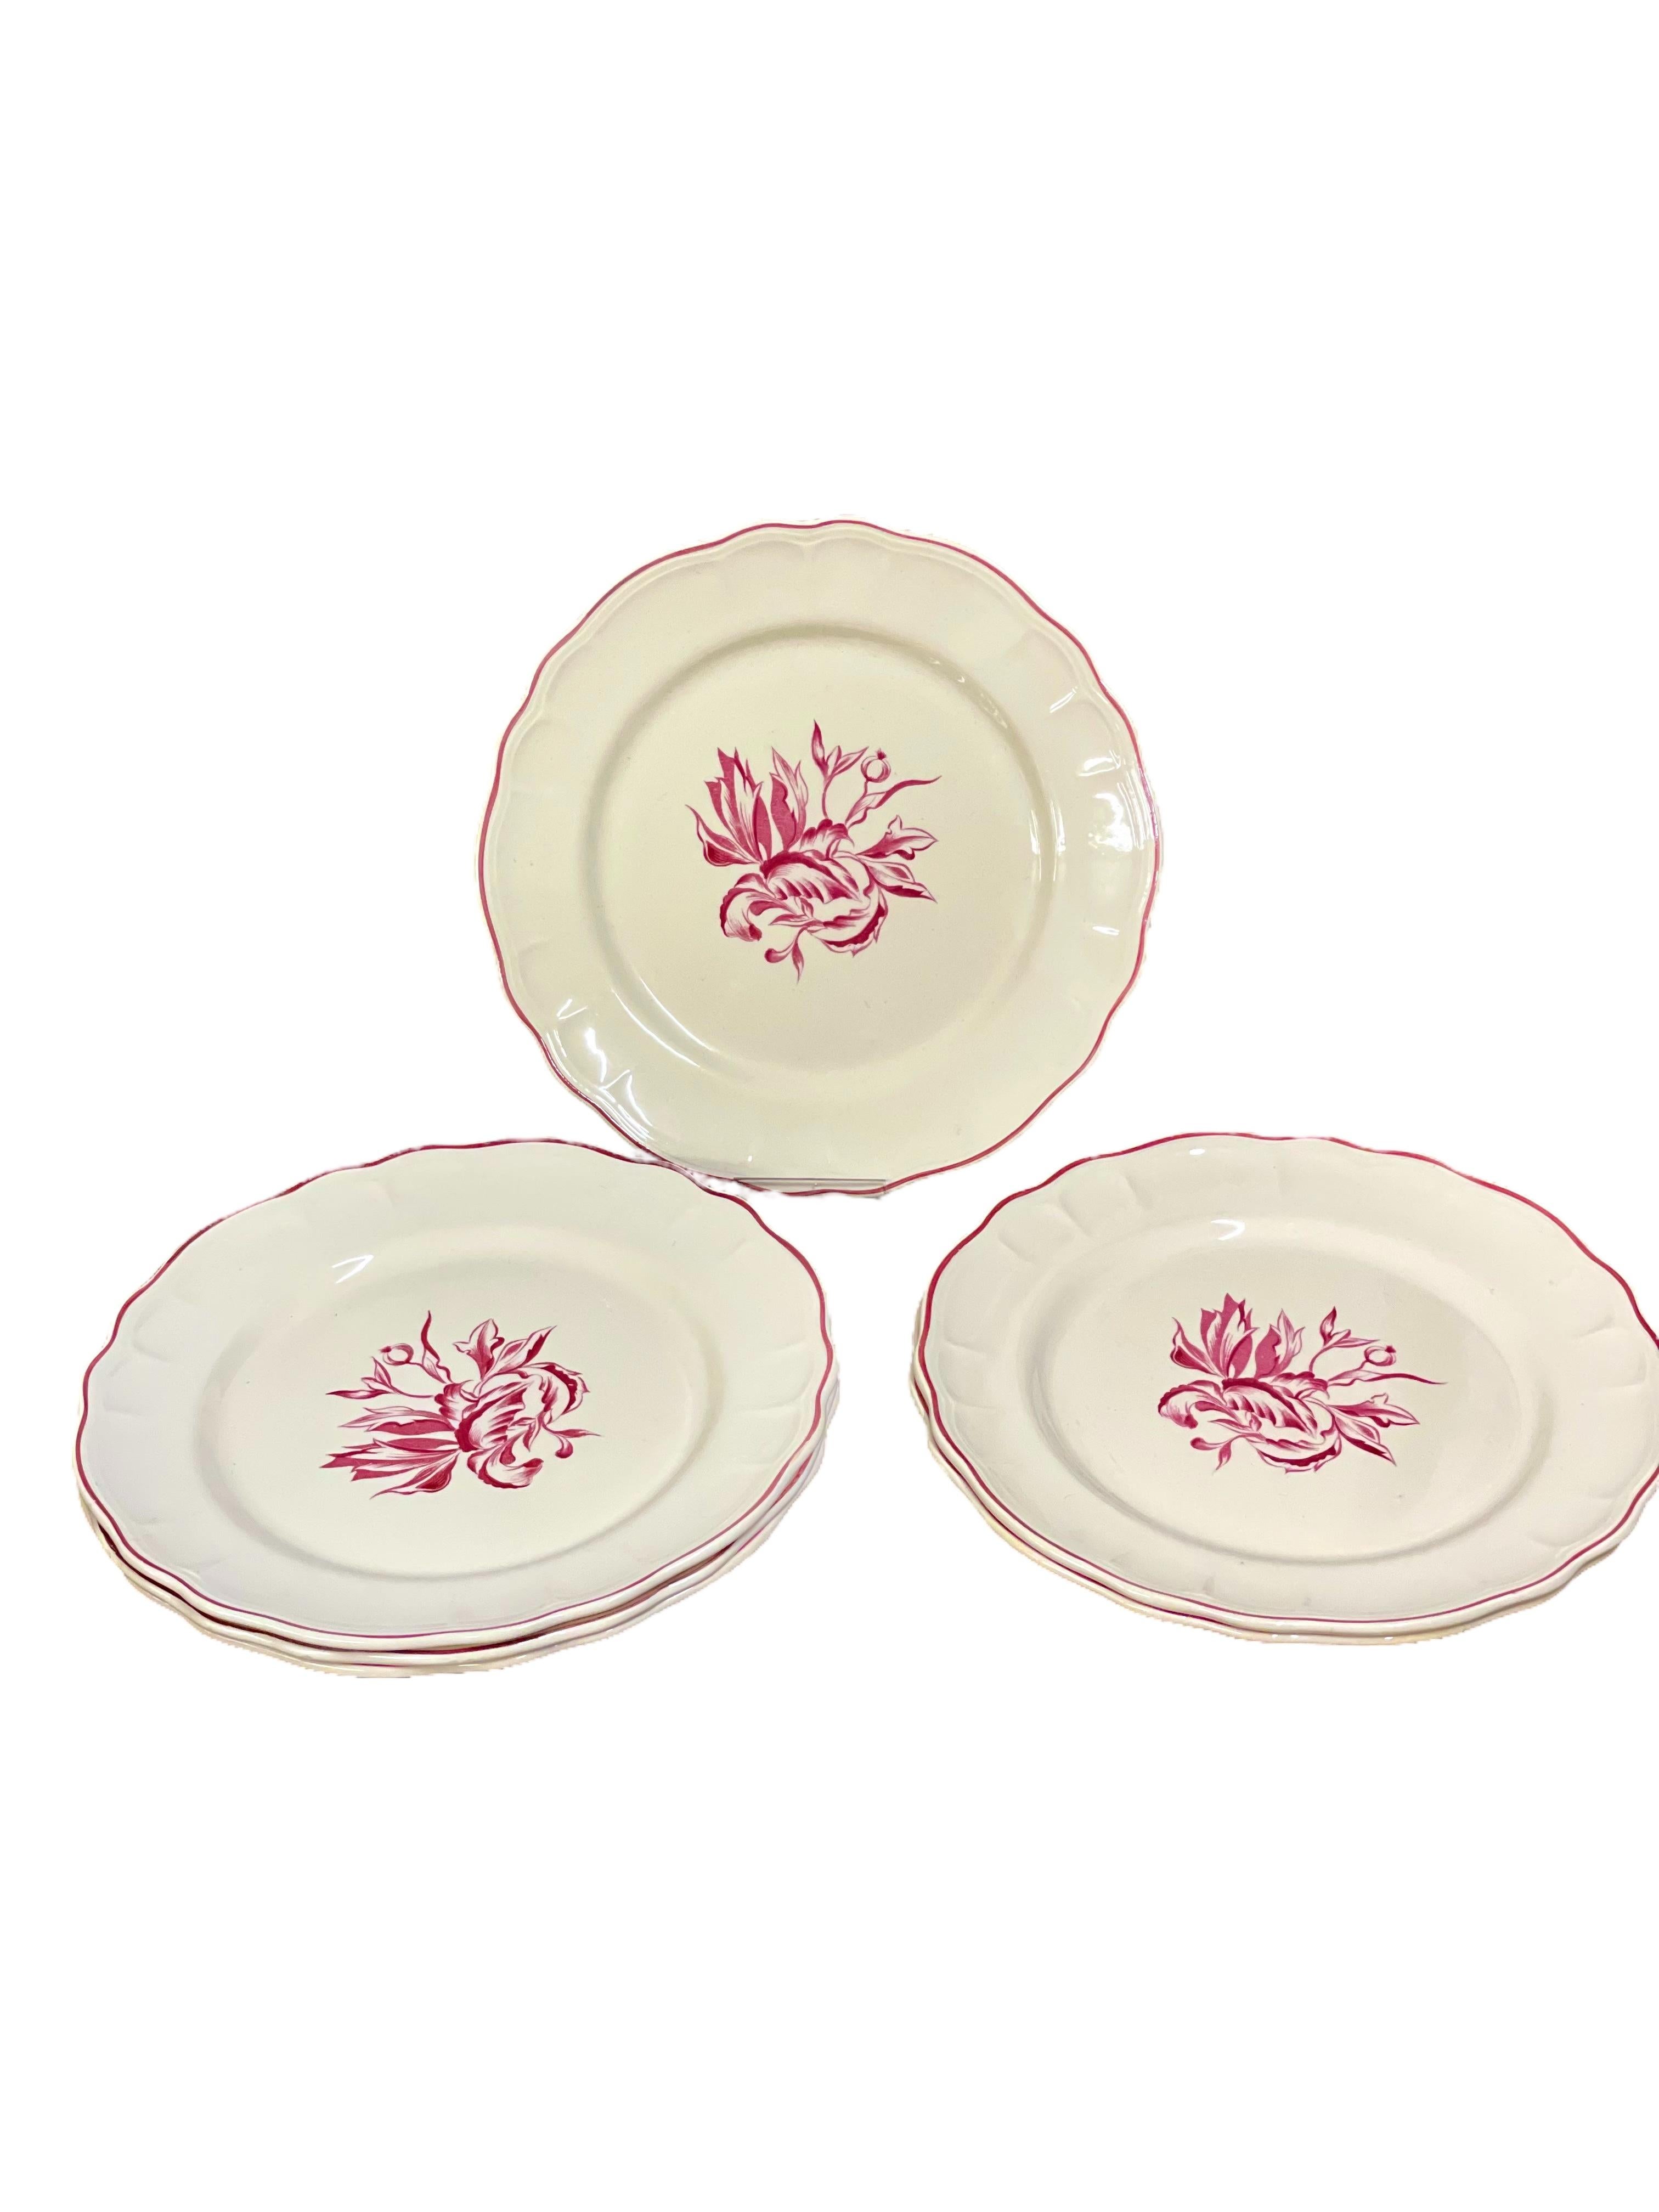 Set of six vintage creamware dinner plates, beautifully decorated with a red transferware print of delicate sprays of foliage. The plates have a pretty scalloped rim, highlighted with a hand- painted red border and are in excellent vintage